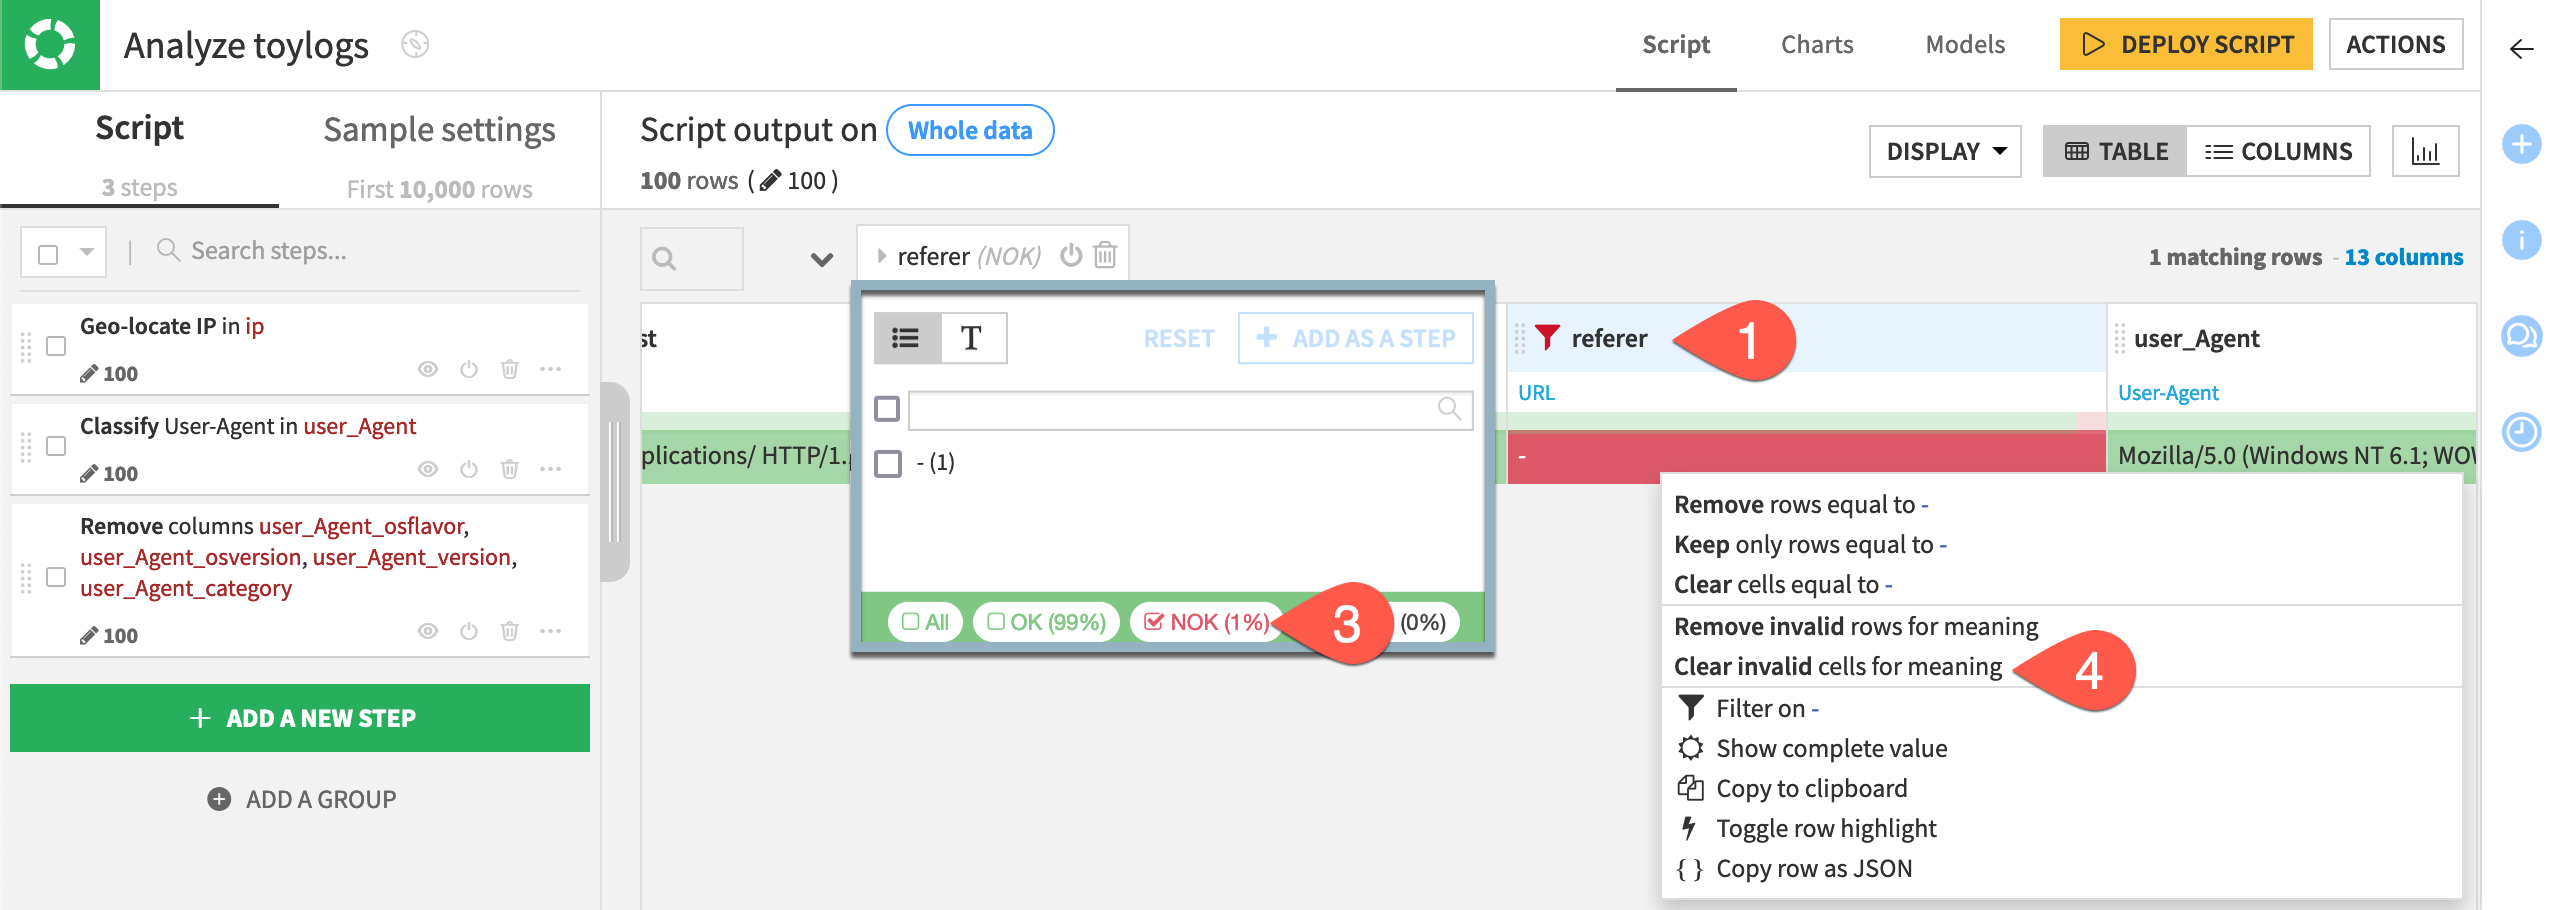 Dataiku screenshot of a dialog for clearing invalid meanings.